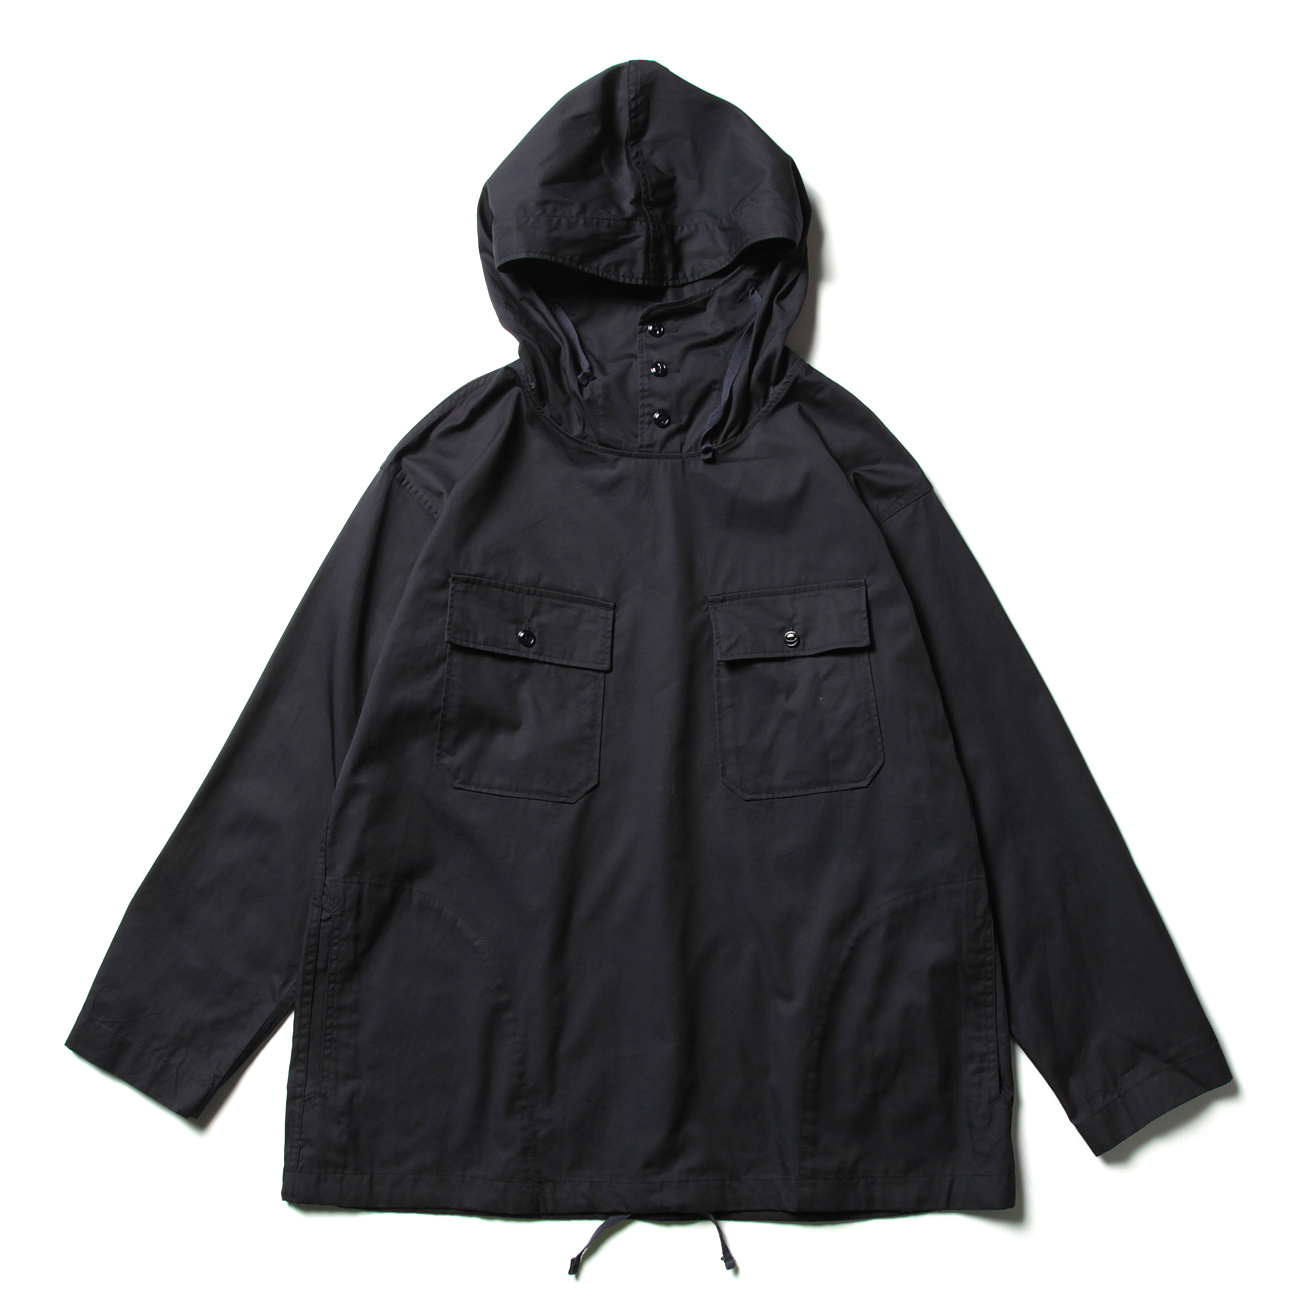 Cagoule Shirt - High Count Twill - Dk.Navy